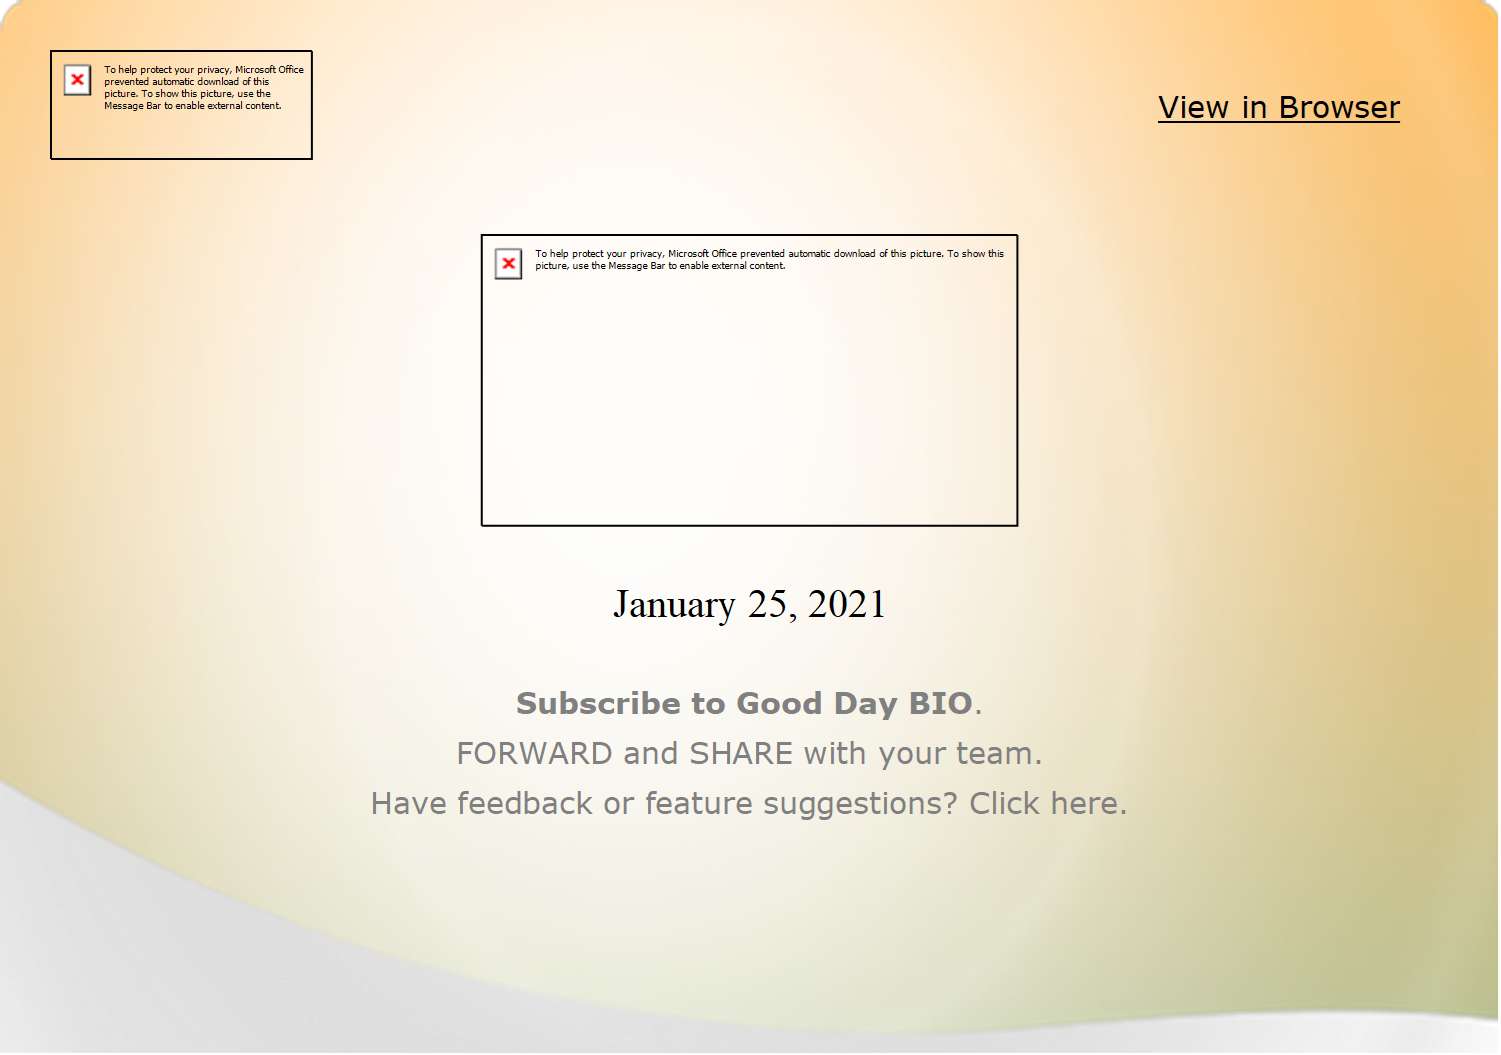  	          	  	View in Browser                  January 25, 2021  Subscribe to Good Day BIO.   FORWARD and SHARE with your team.   Have feedback or feature suggestions? Click here.               	       